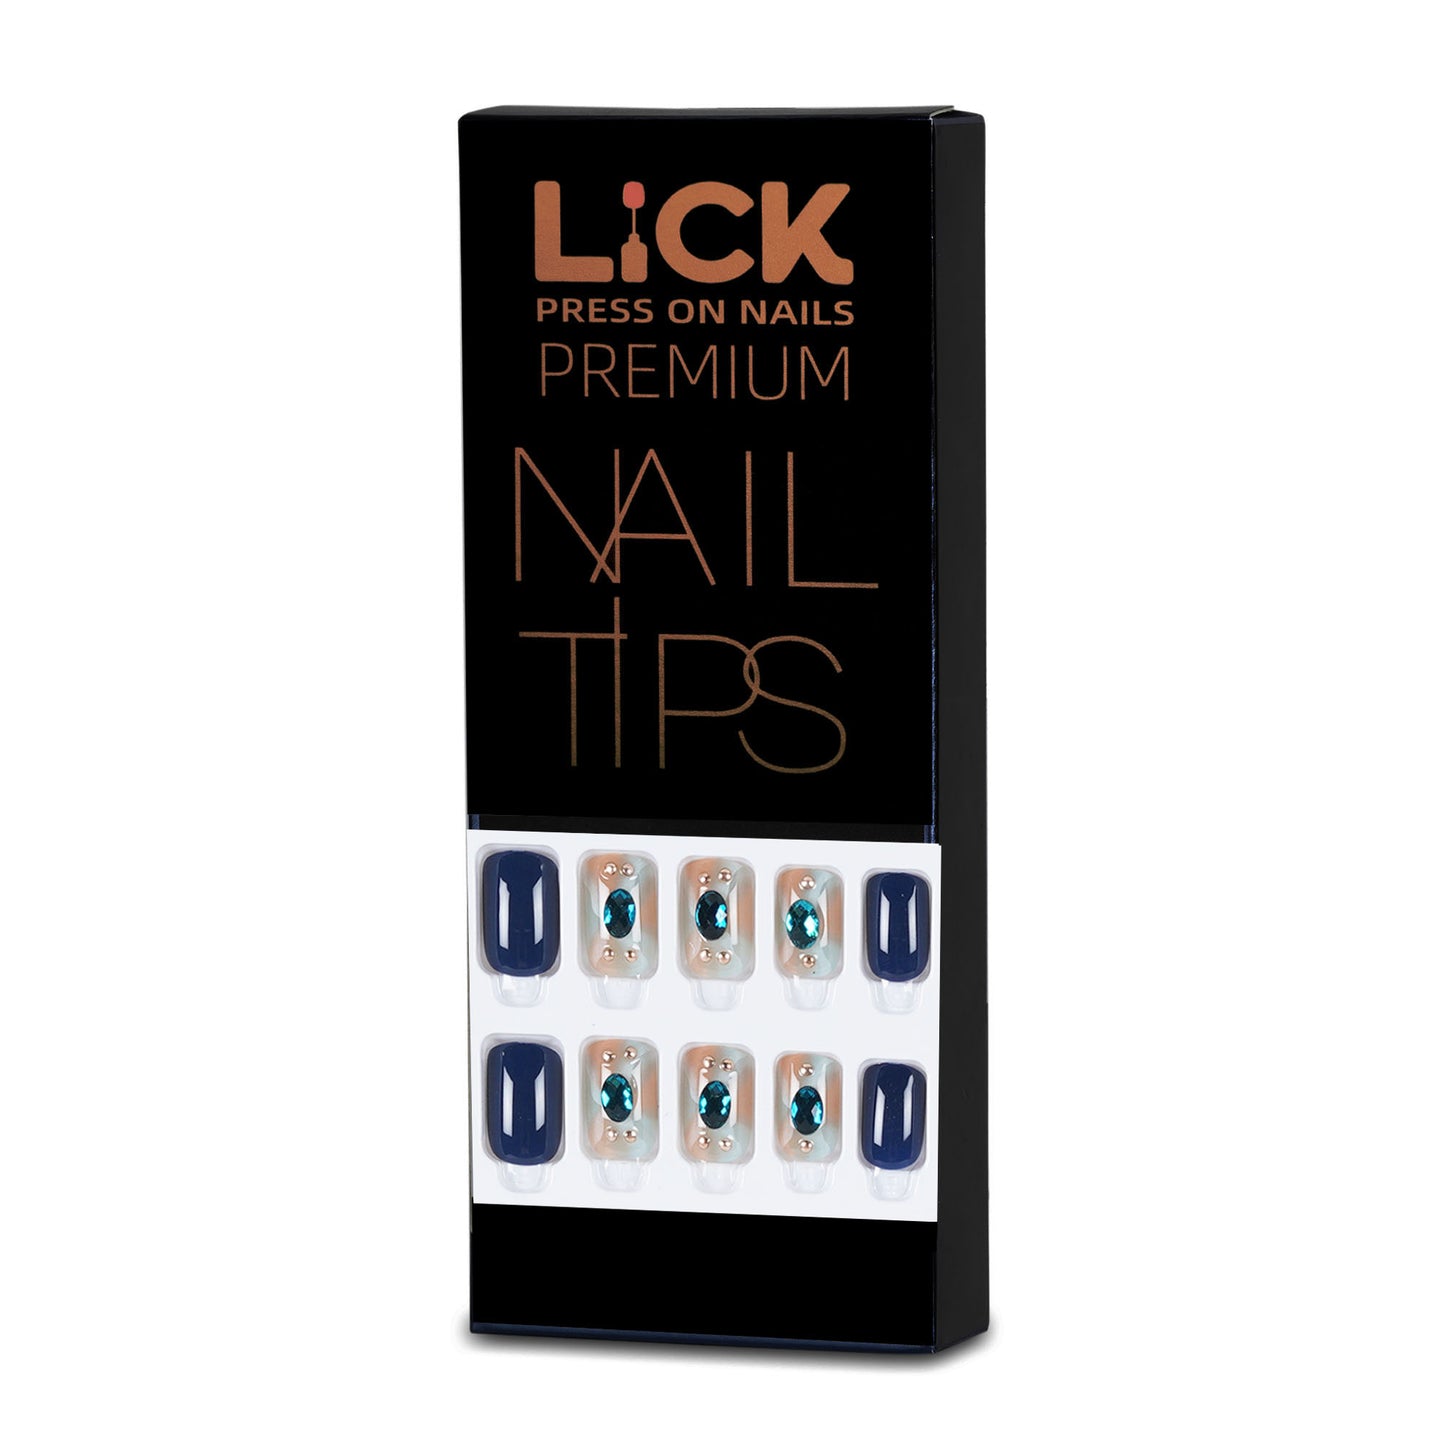 LICK NAILS Chromatic Pink Square Press on Nails